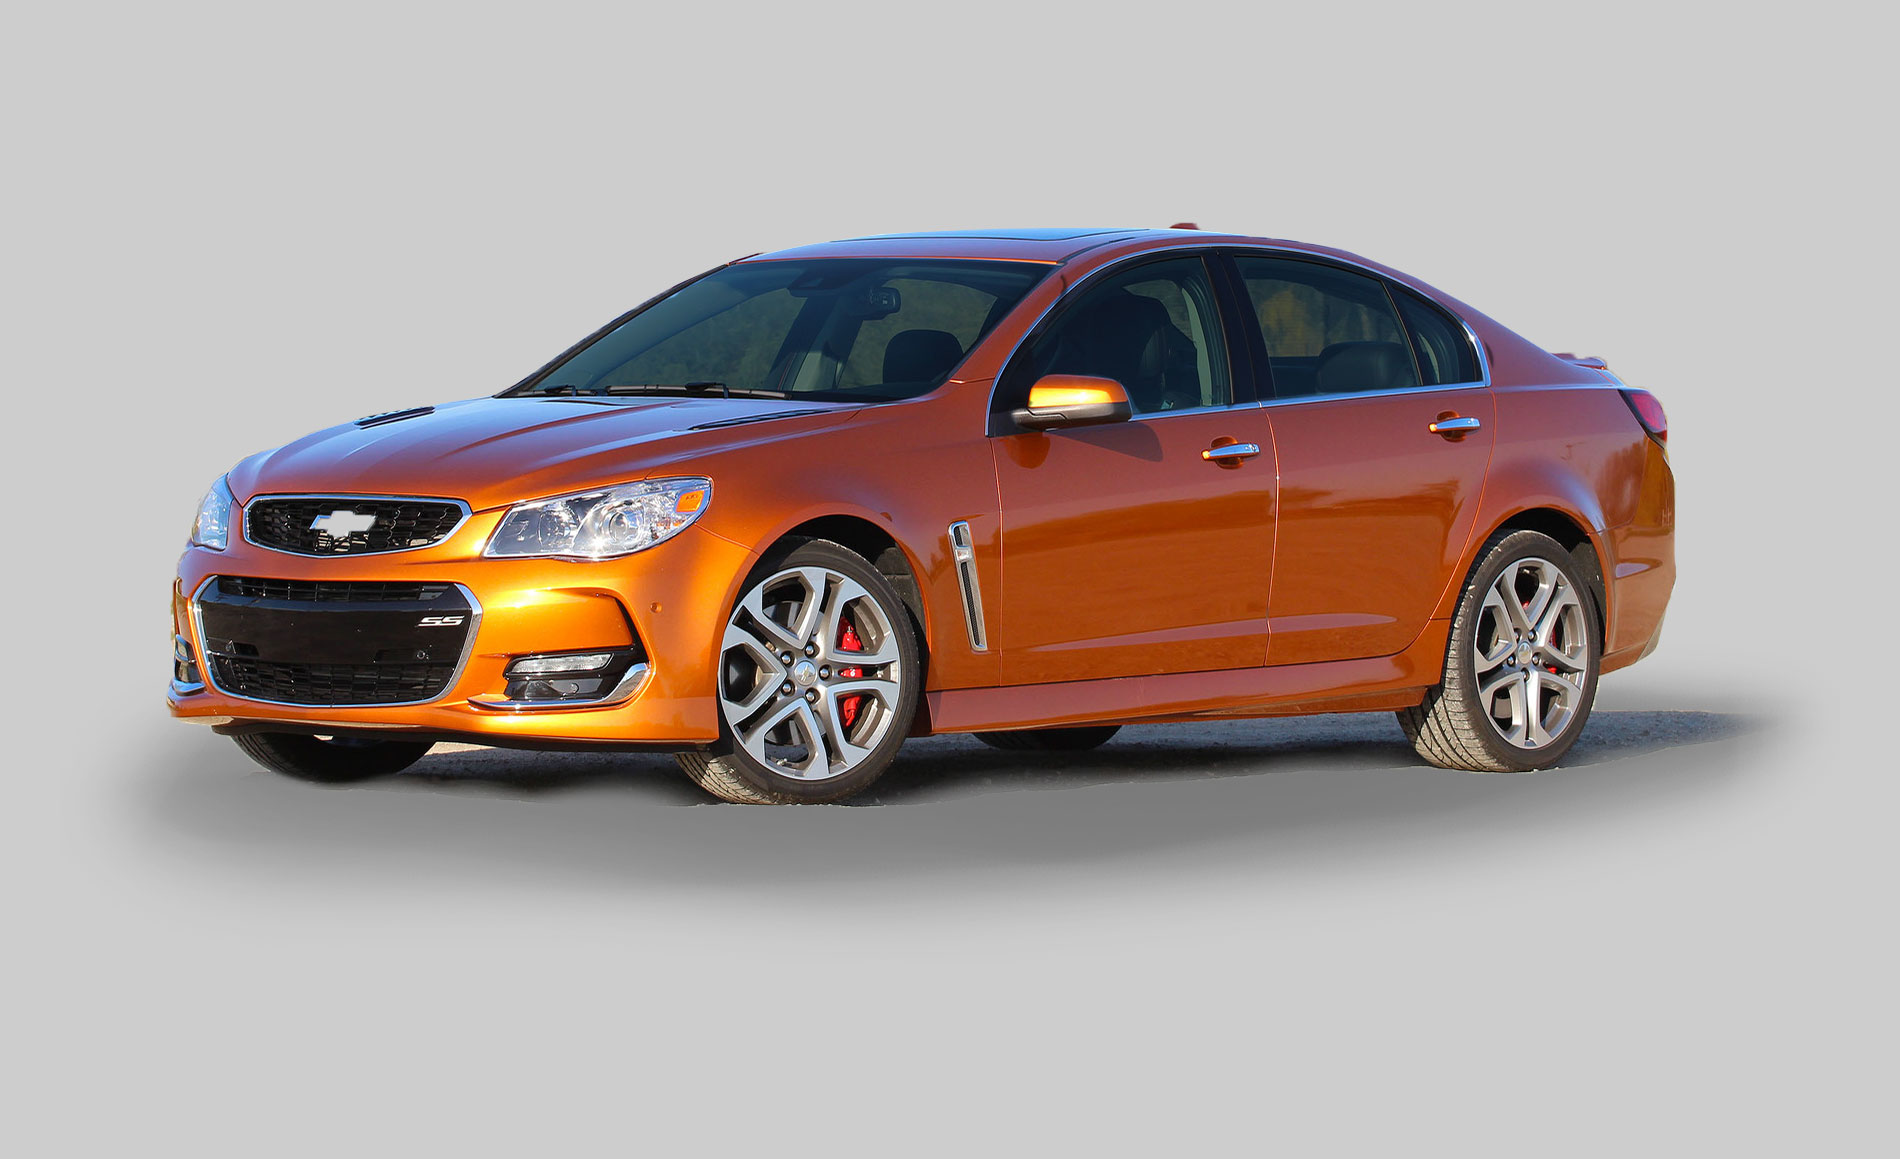 Performance Packages for the Chevrolet SS Sedan